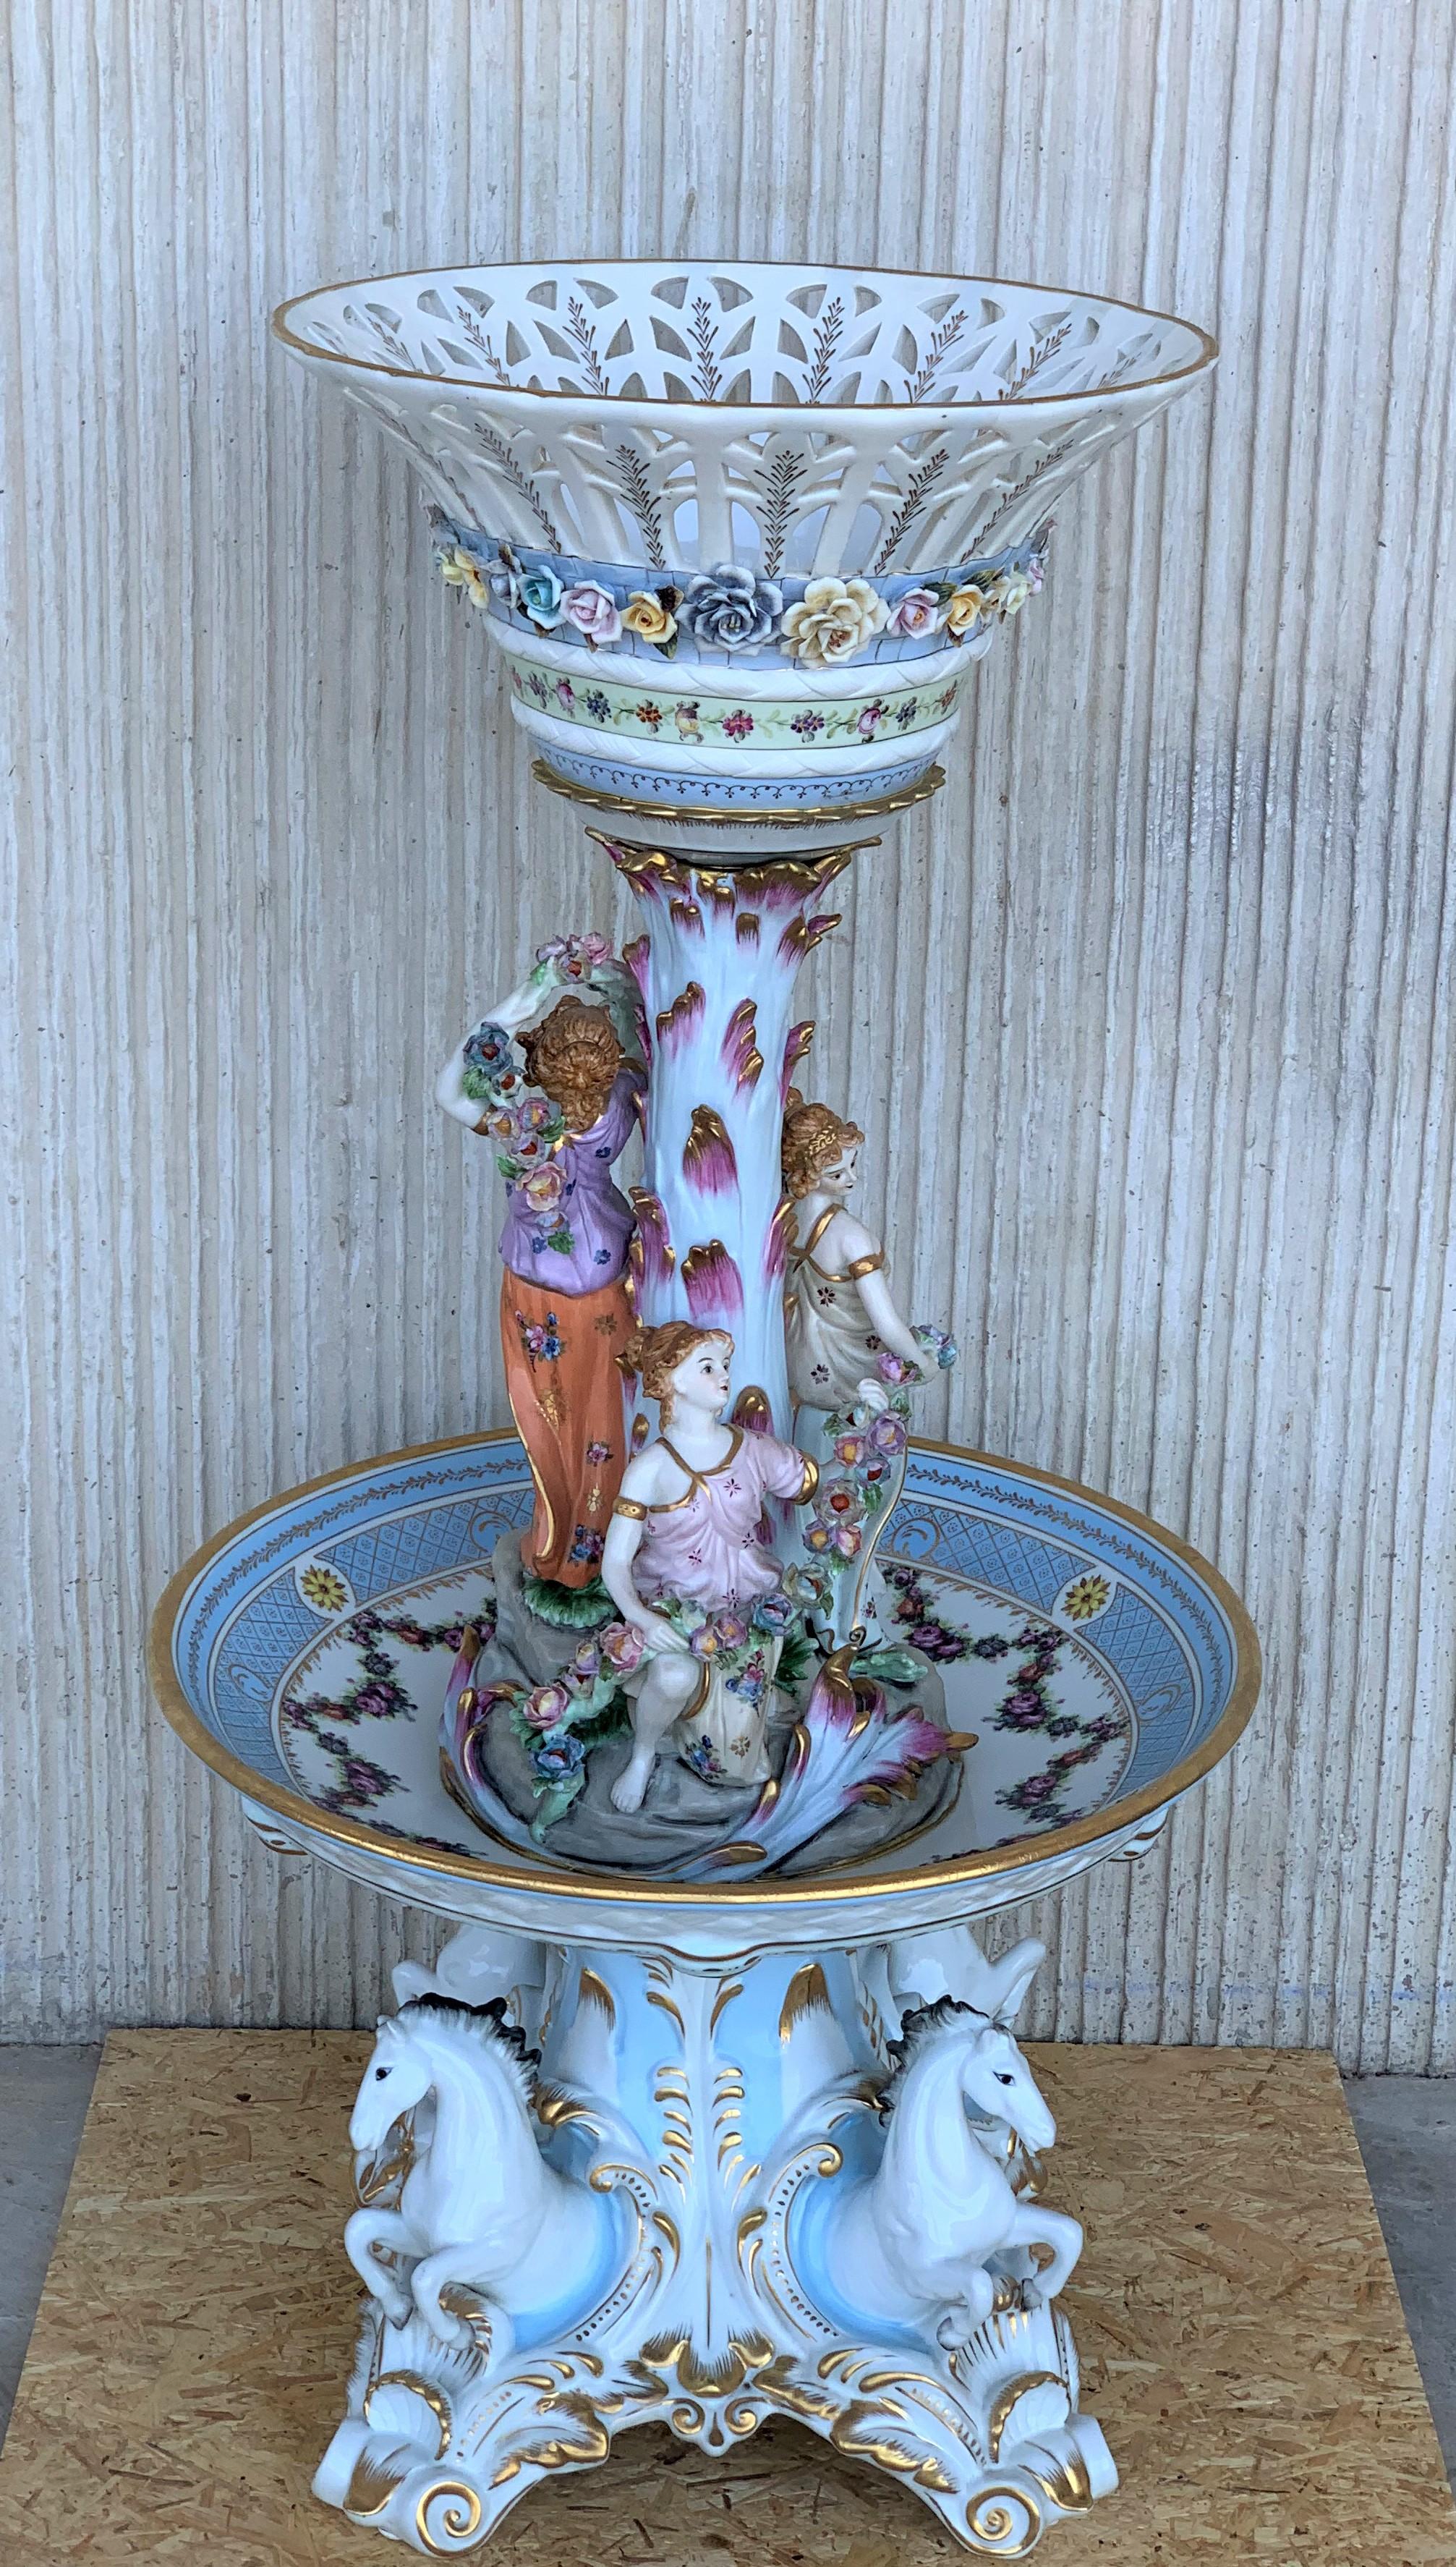 Serving piece, fruit bowl center table with 1 plates and 1 high, basfuit basket in enameled porcelain.
This highly decorative footed bowl, reticulated and painted with female figures adorned with flowers, is raised on a charmingly decorative base